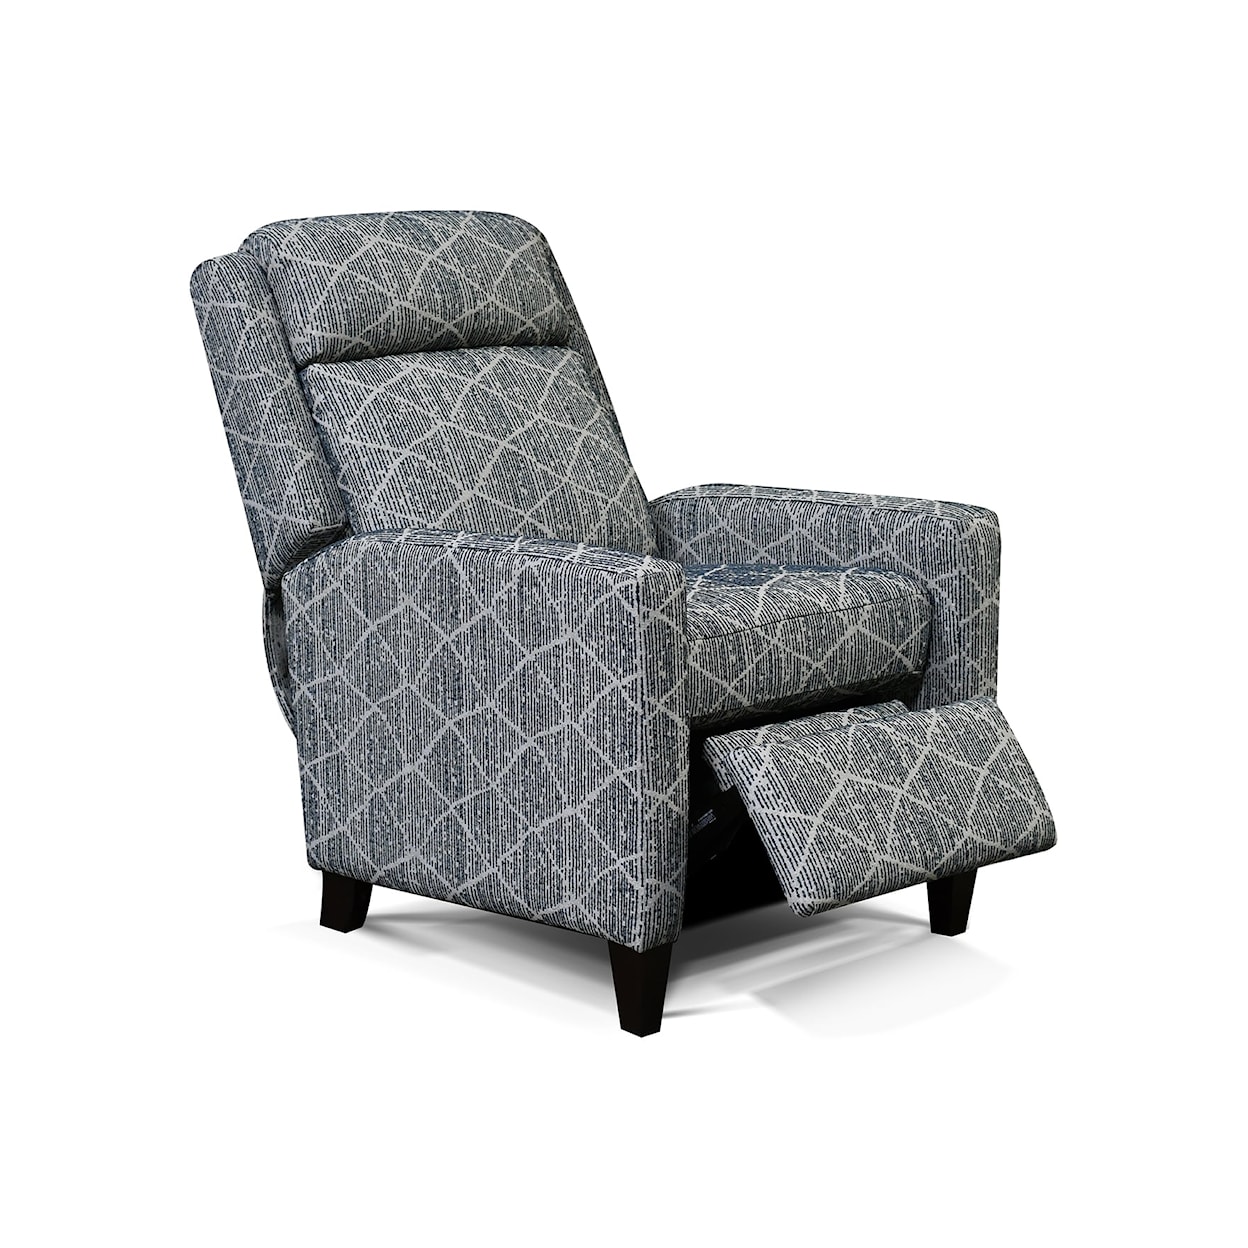 England 6300 Series Chairs Push Back Recliner